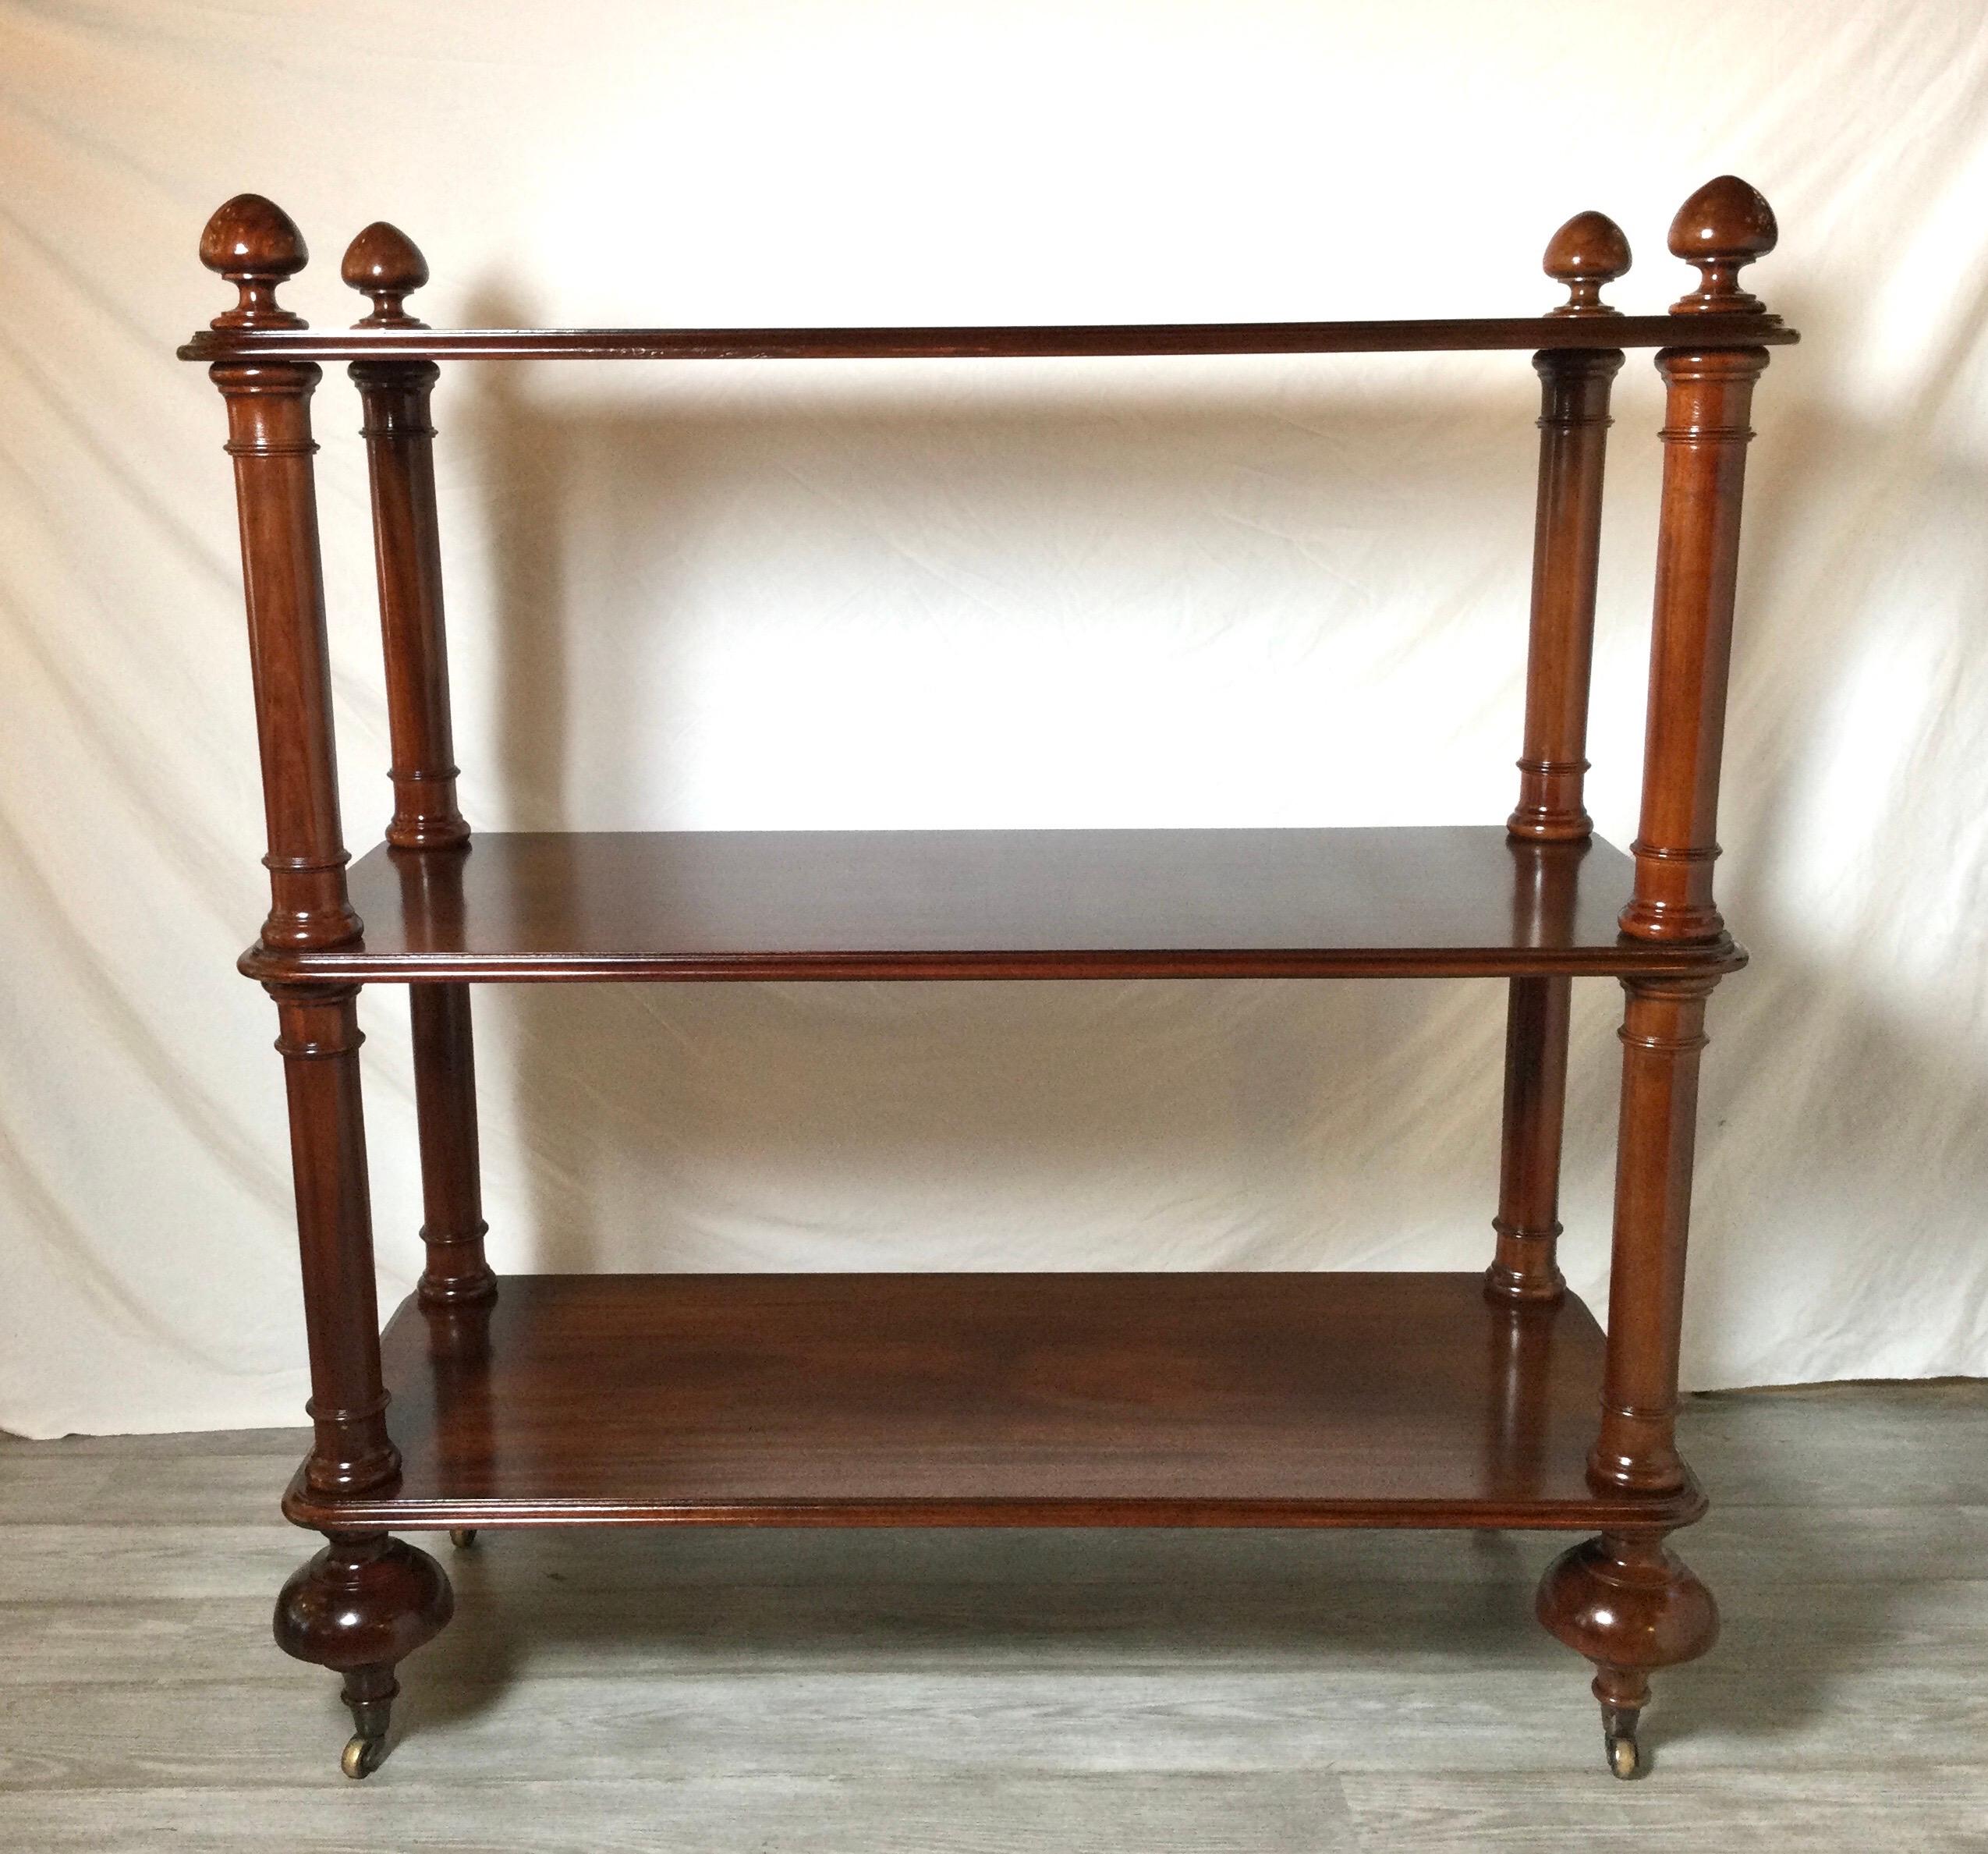 Solid Mahogany three tiered silent butler/server. The solid wood shelves with turned posts at the corners with original solid brass castors. Classic William IV styling but made in the early part of the 20th century 
A beautiful piece of furniture